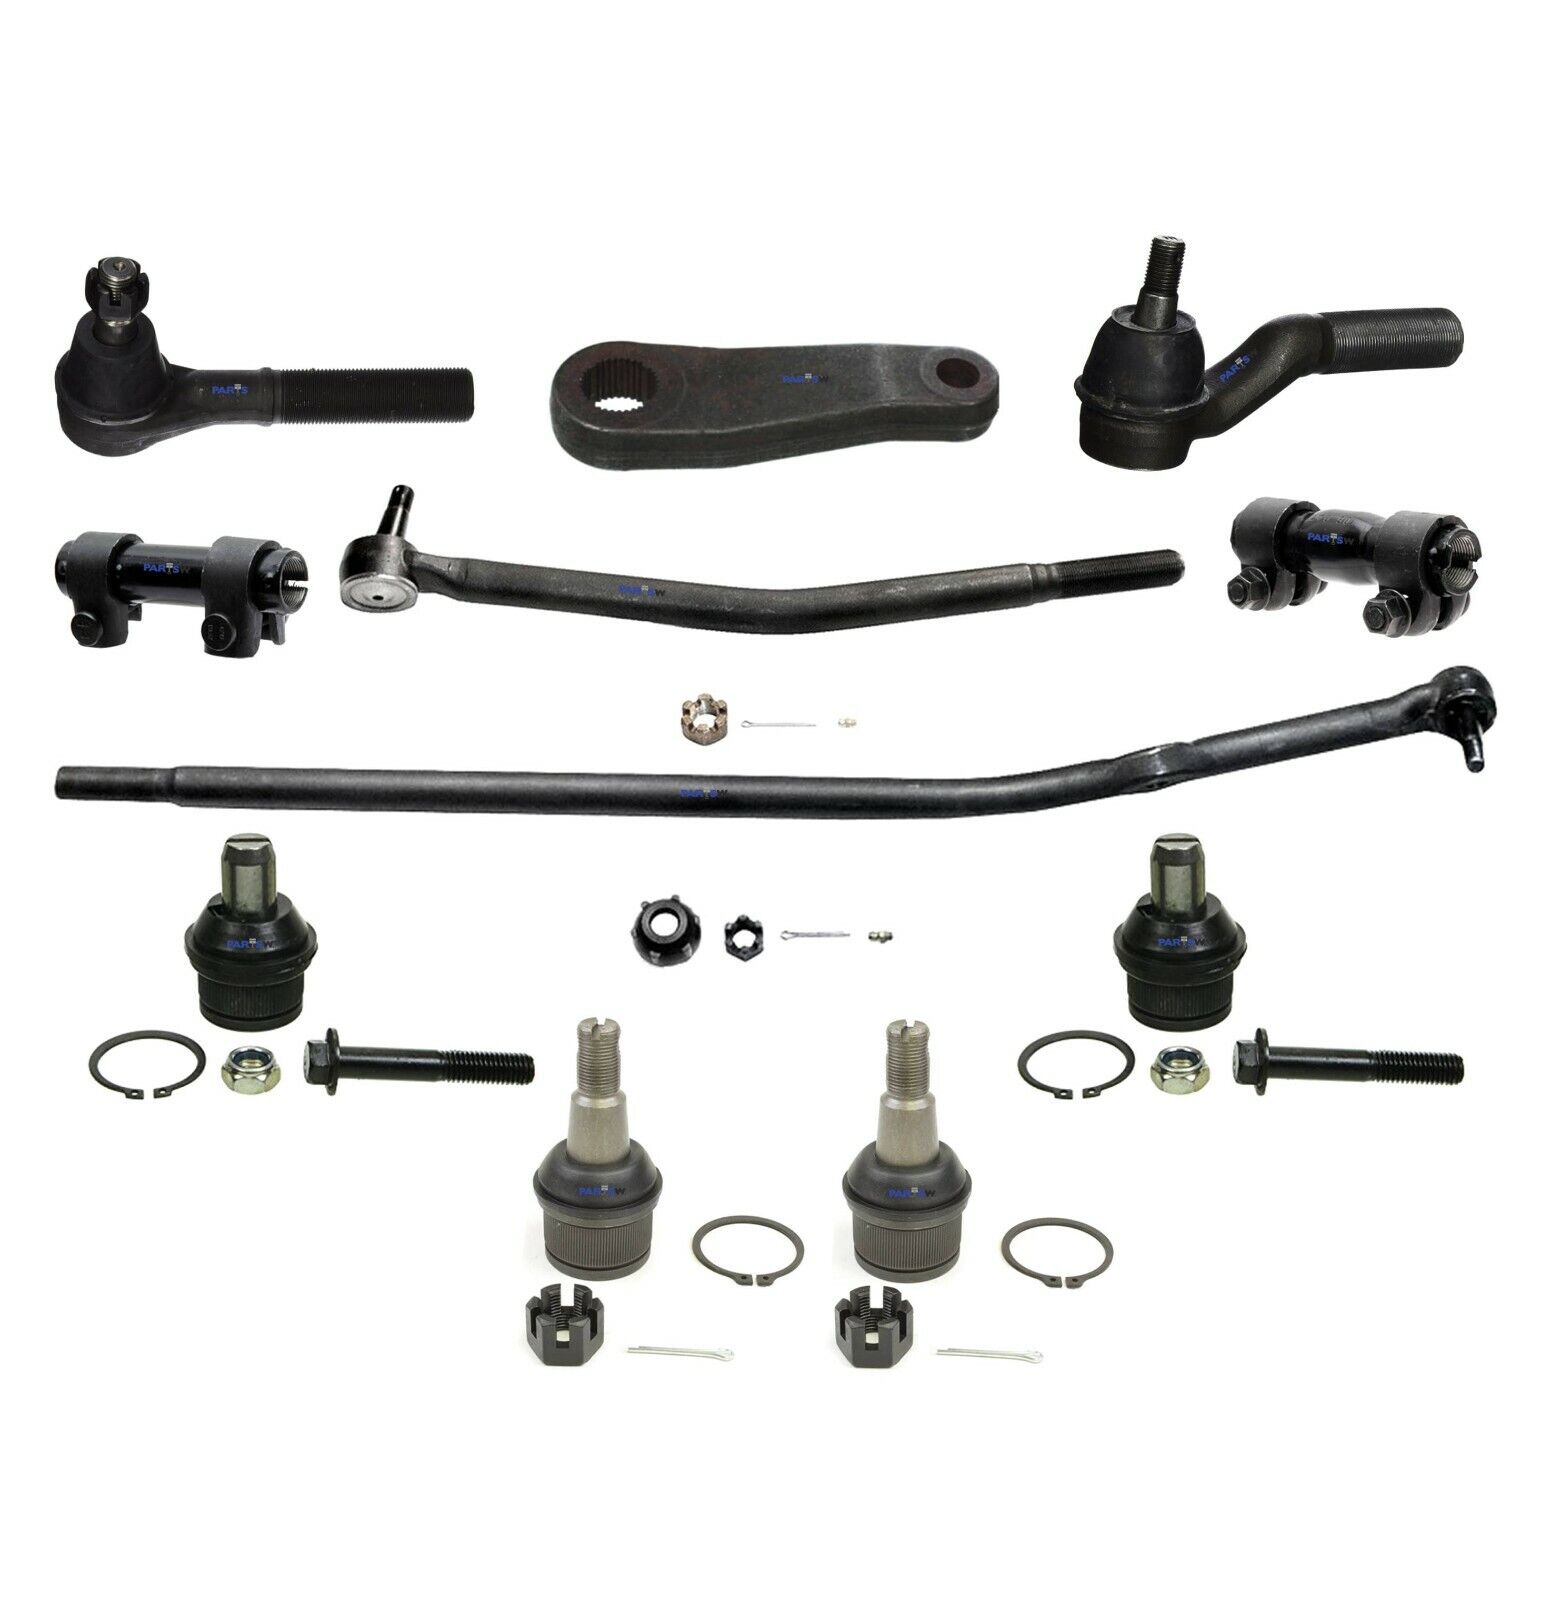 11 Pc Suspension Kit for Ford E-250 E-350 E-450 Tie Rods Ball Joints Pitman Arm